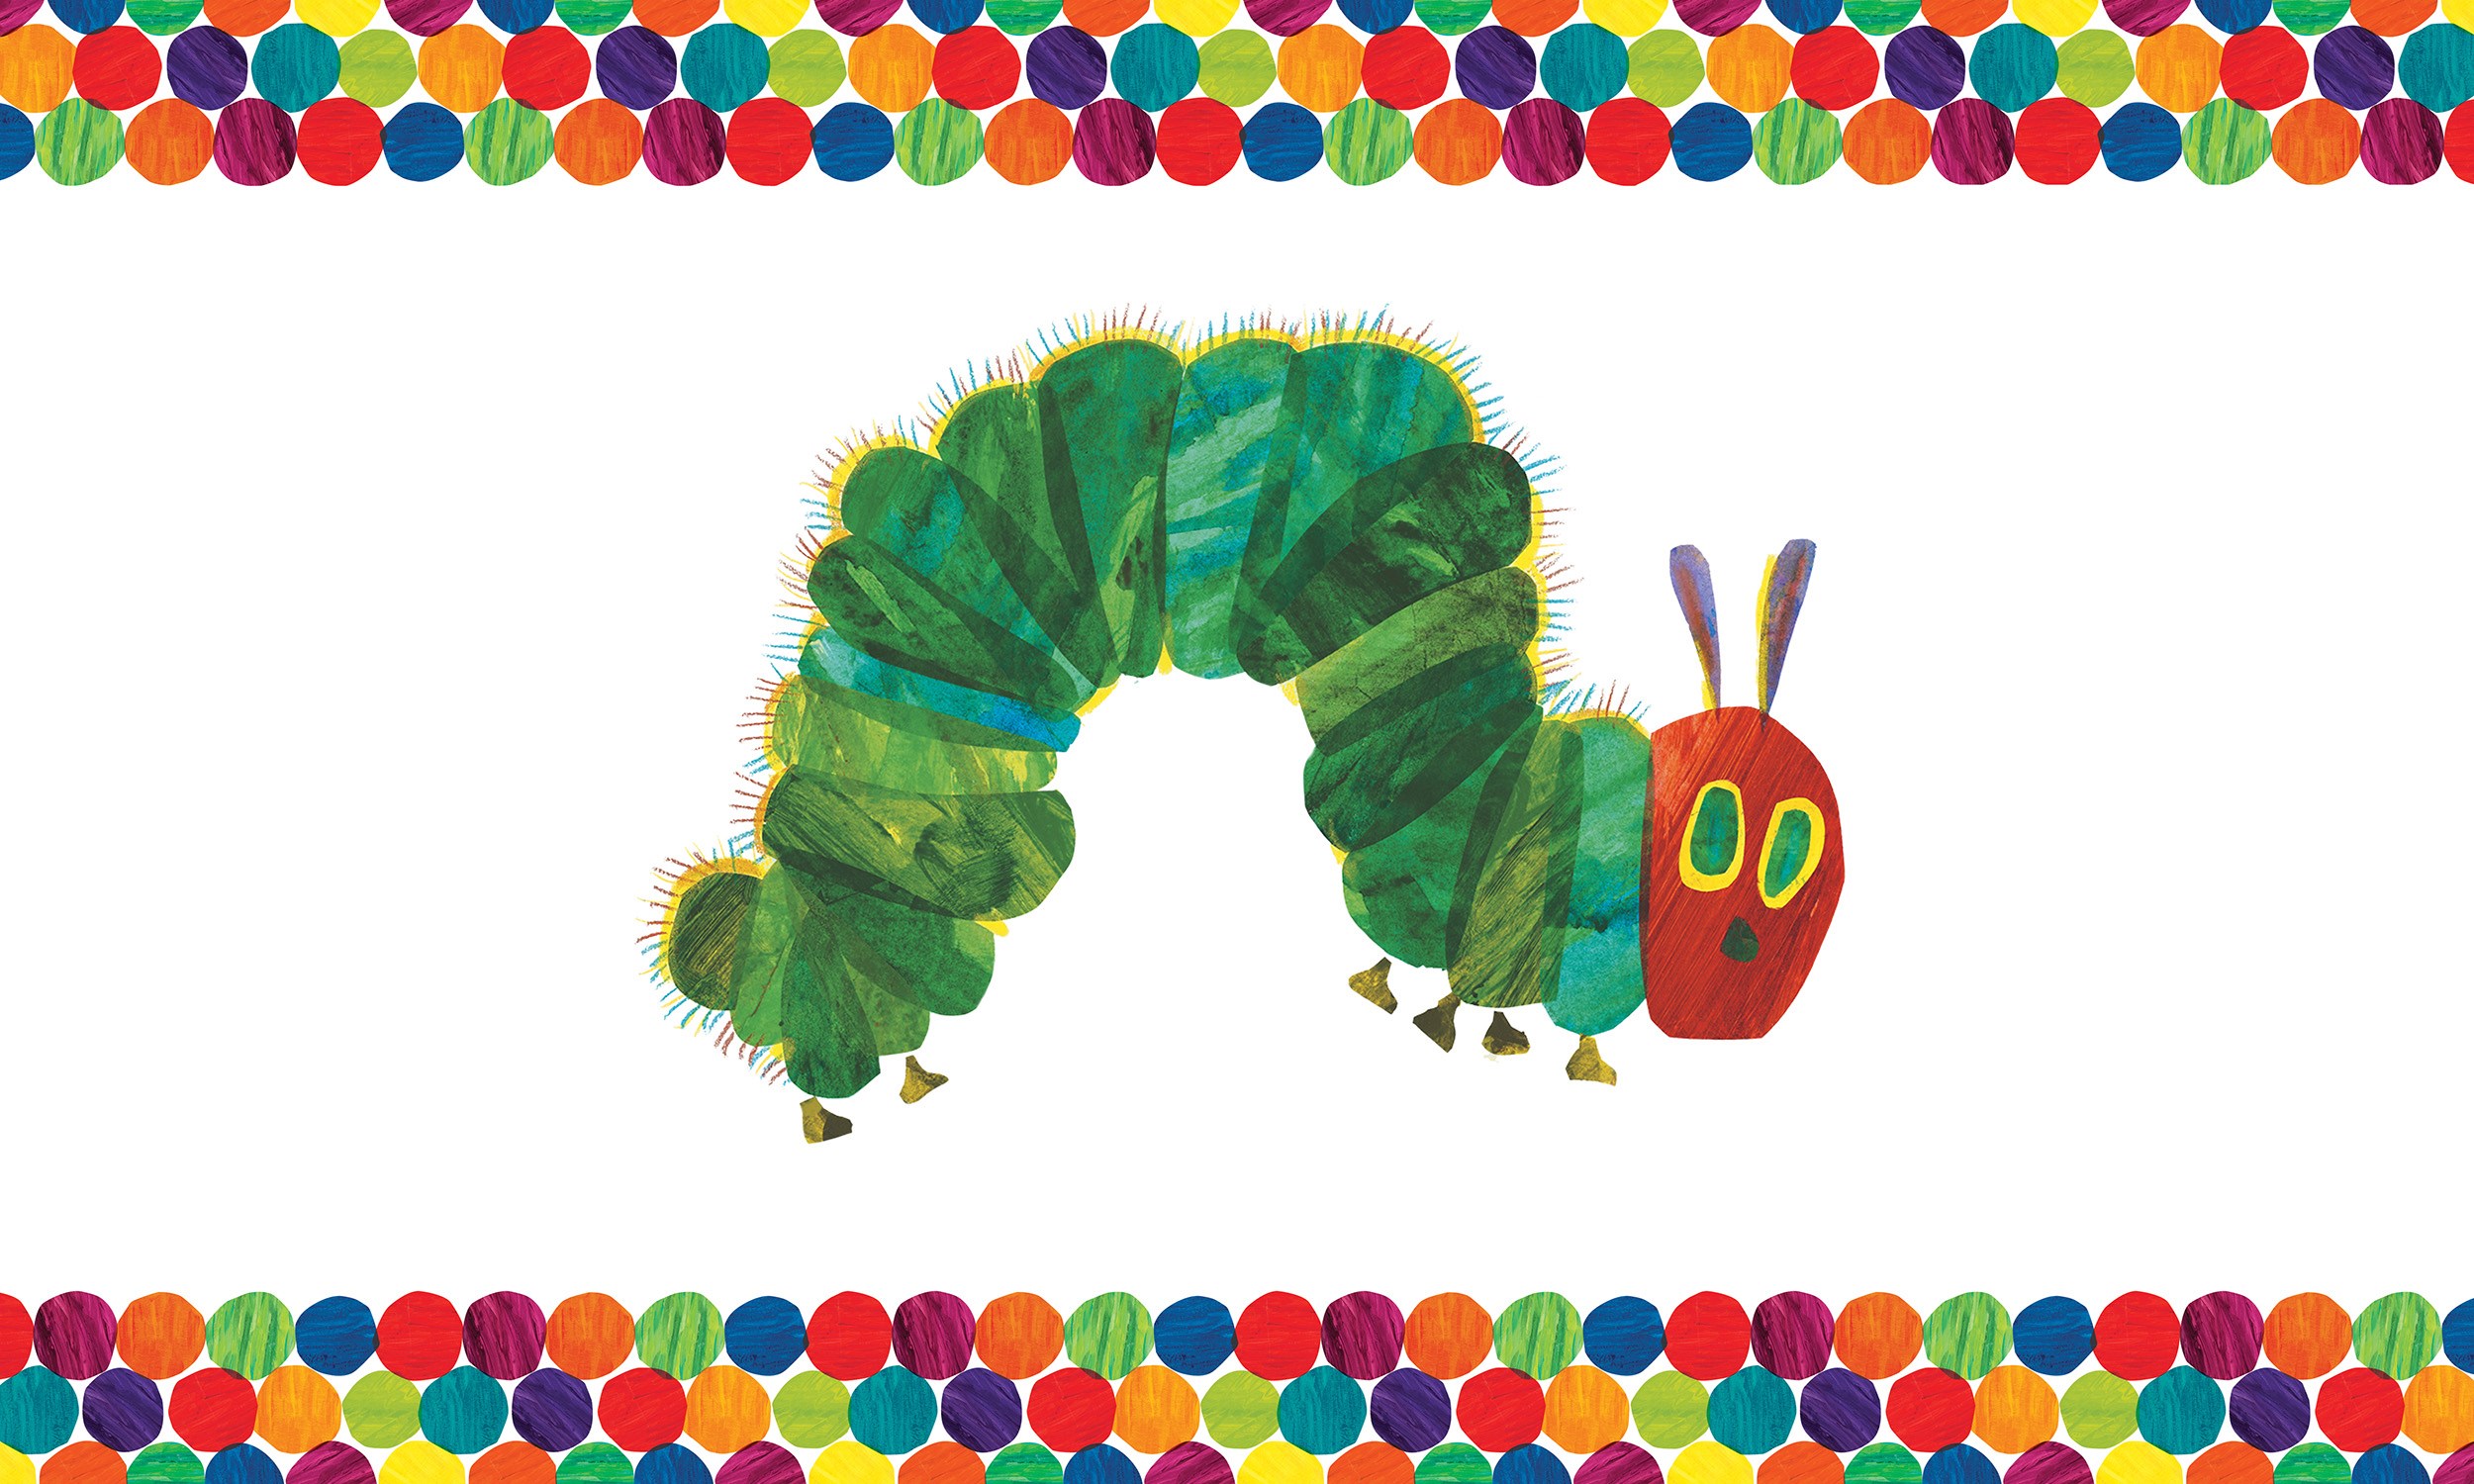 Promotional image of the Very Hungry Caterpillar